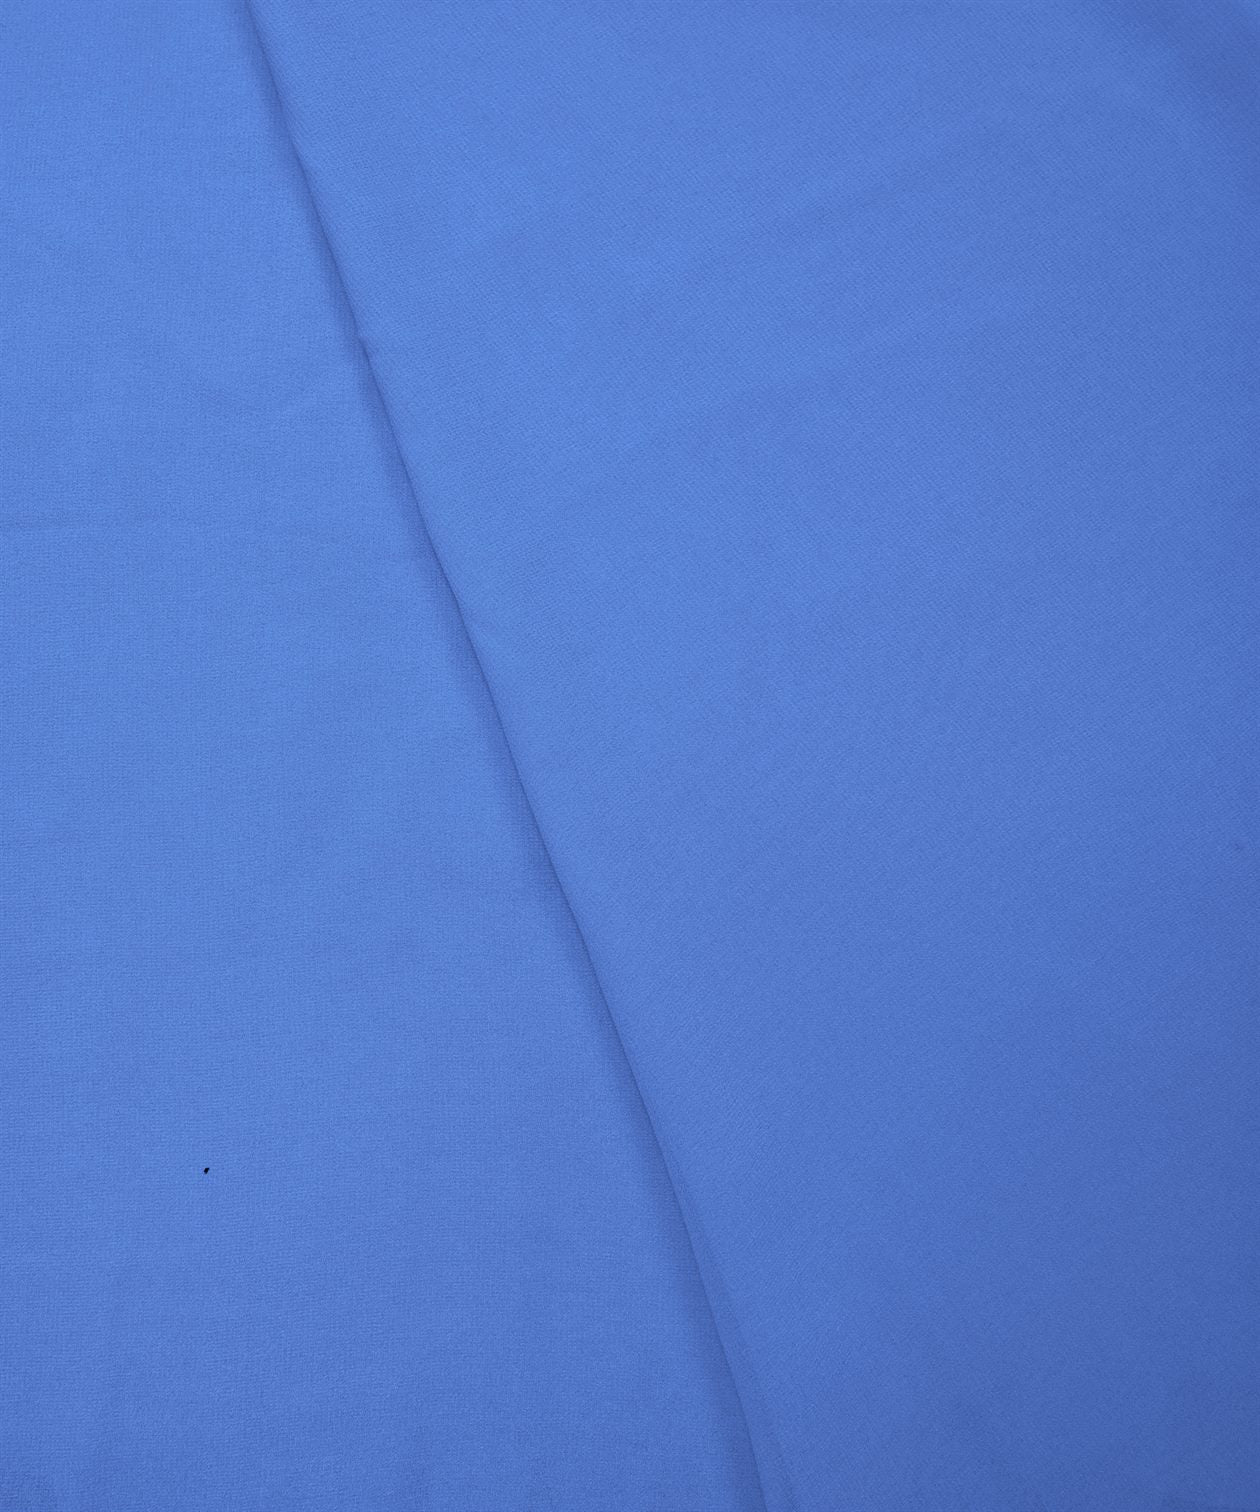 Sky Blue Plain Dyed Georgette (60 Grams) Fabric